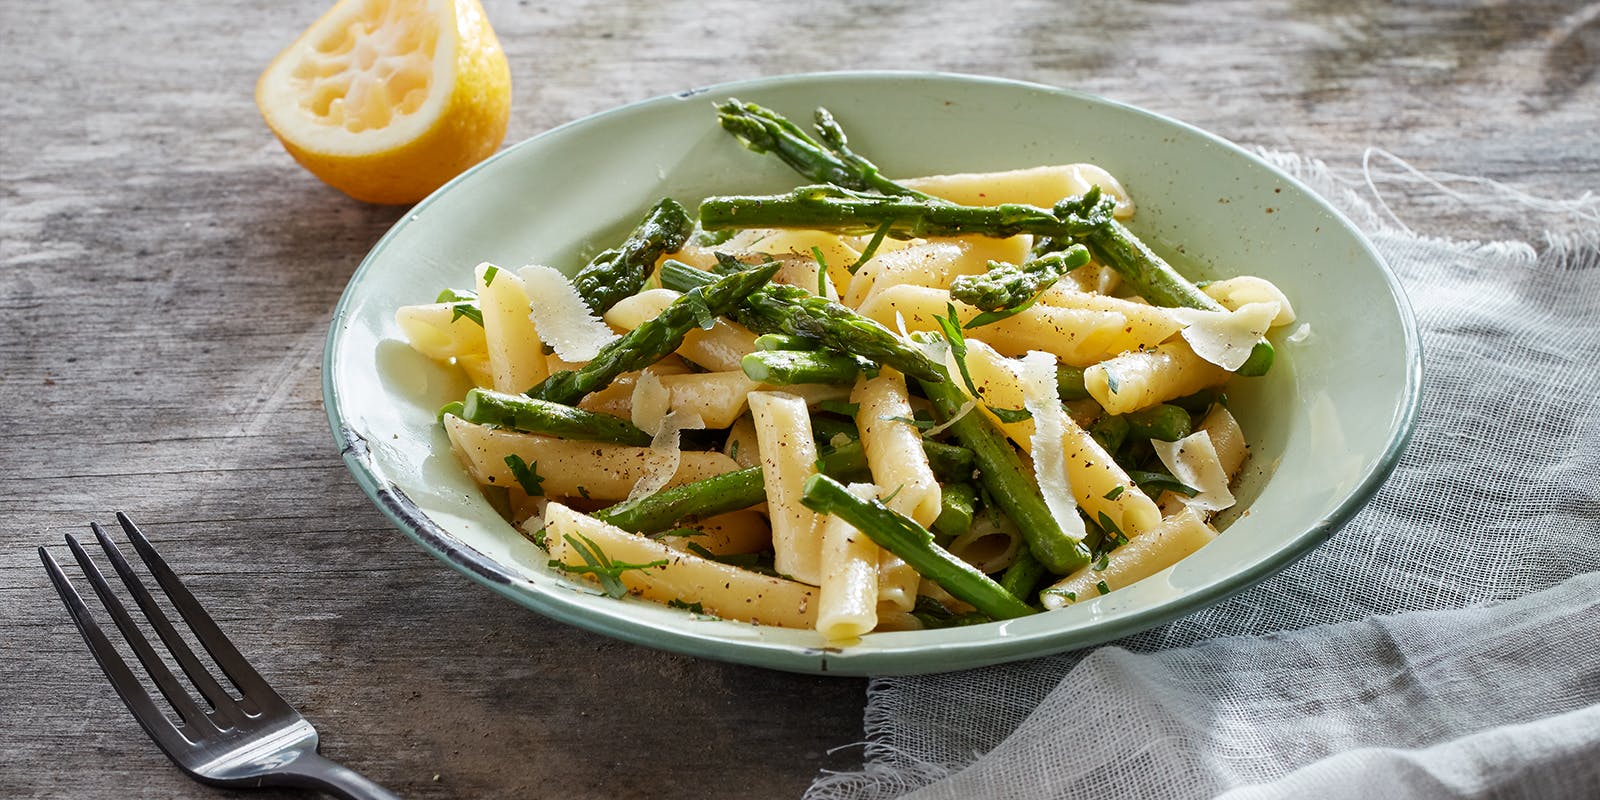 Penne with asparagus, parsley and brown butter